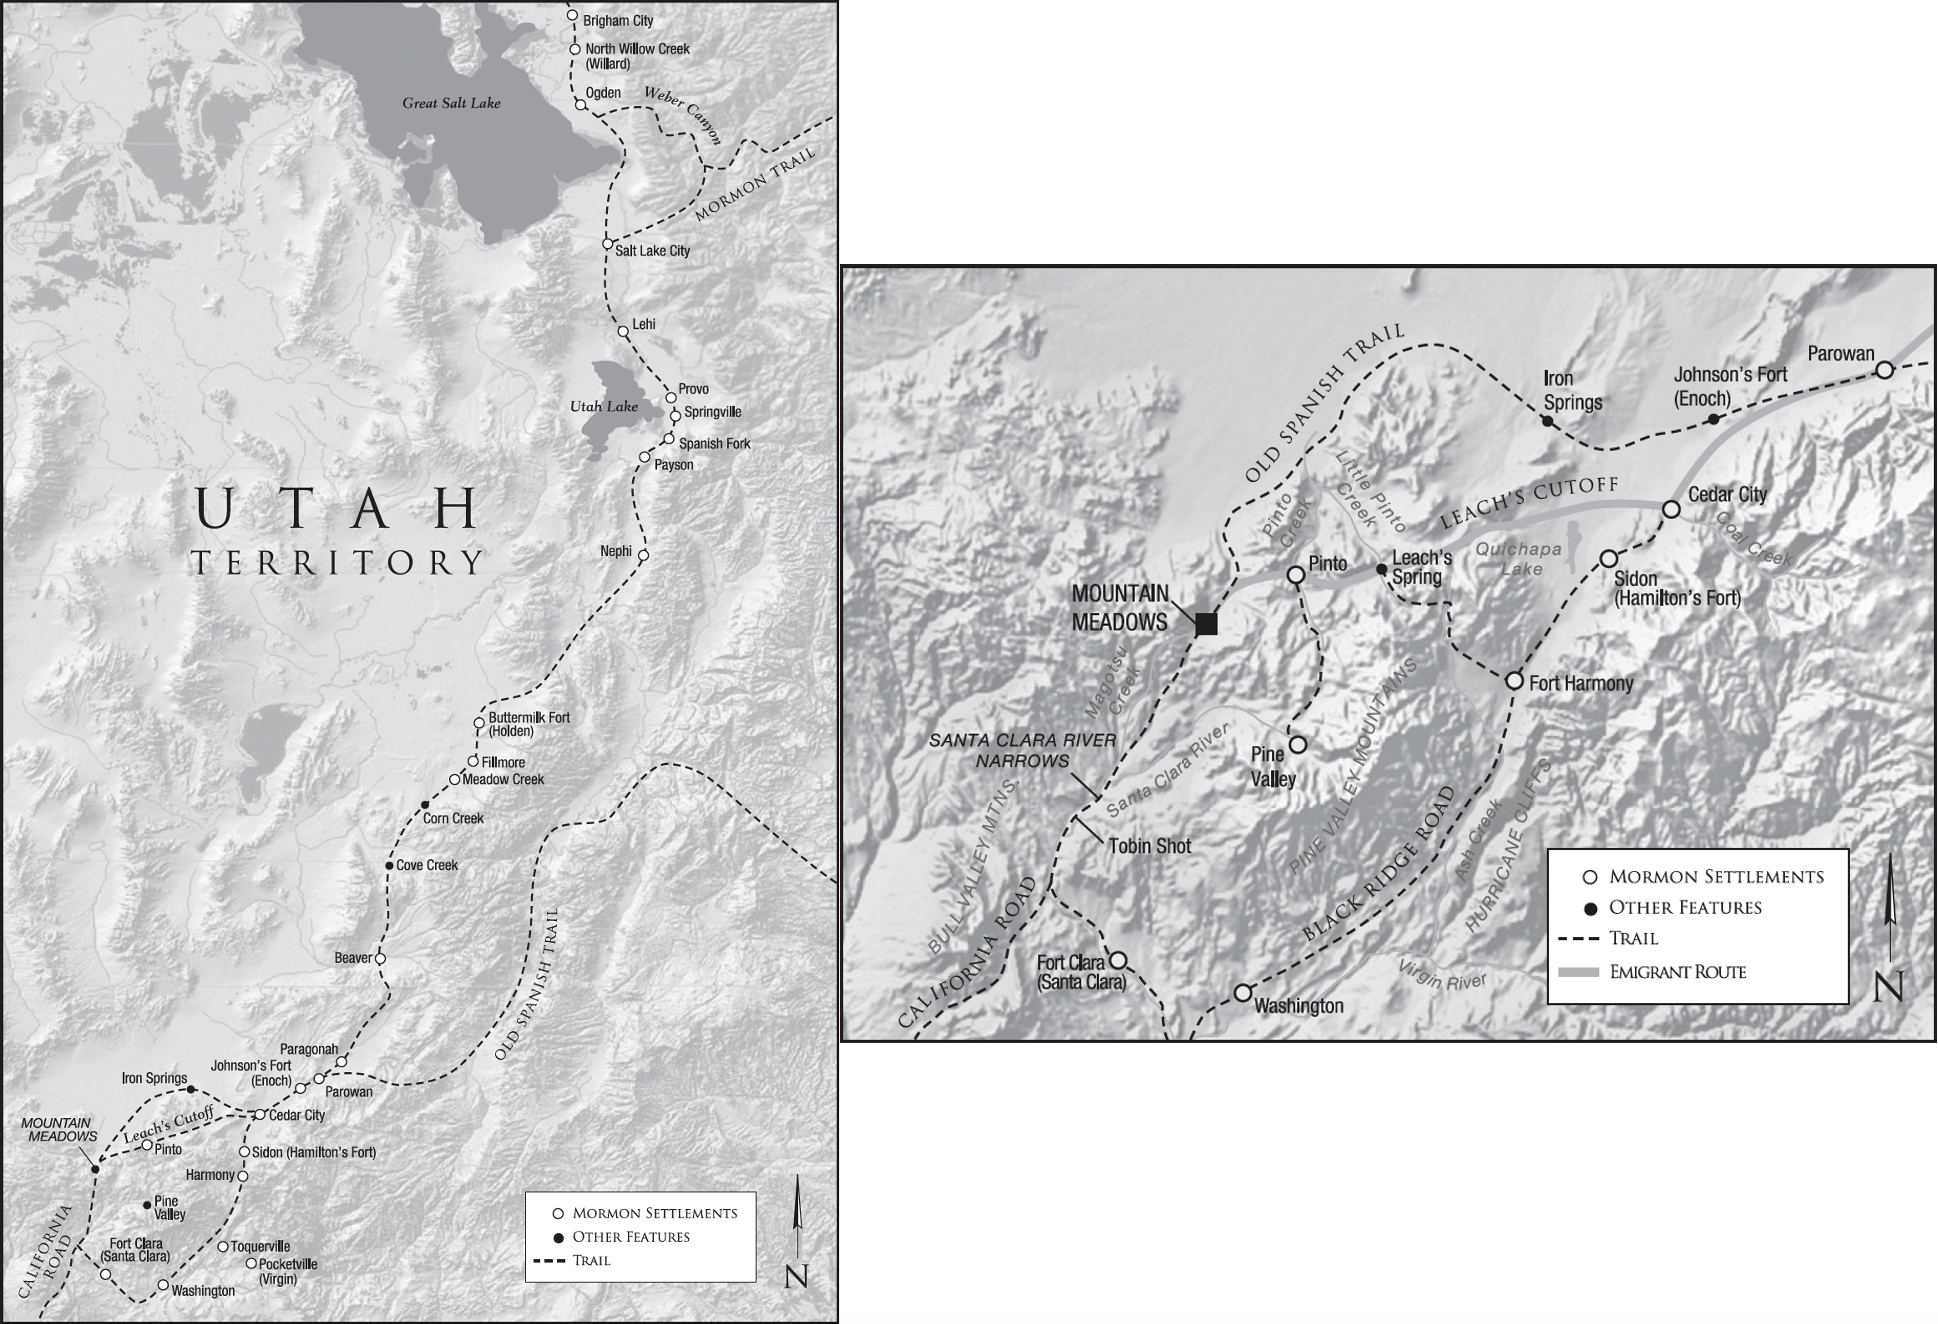 Map of Utah Territory (left) and the area in Southern Utah around the site of the Mountain Meadows Massacre (right). Maps by Sheryl Dickert Smith and Tom Child and printed in Massacre at Mountain Meadows (2008).